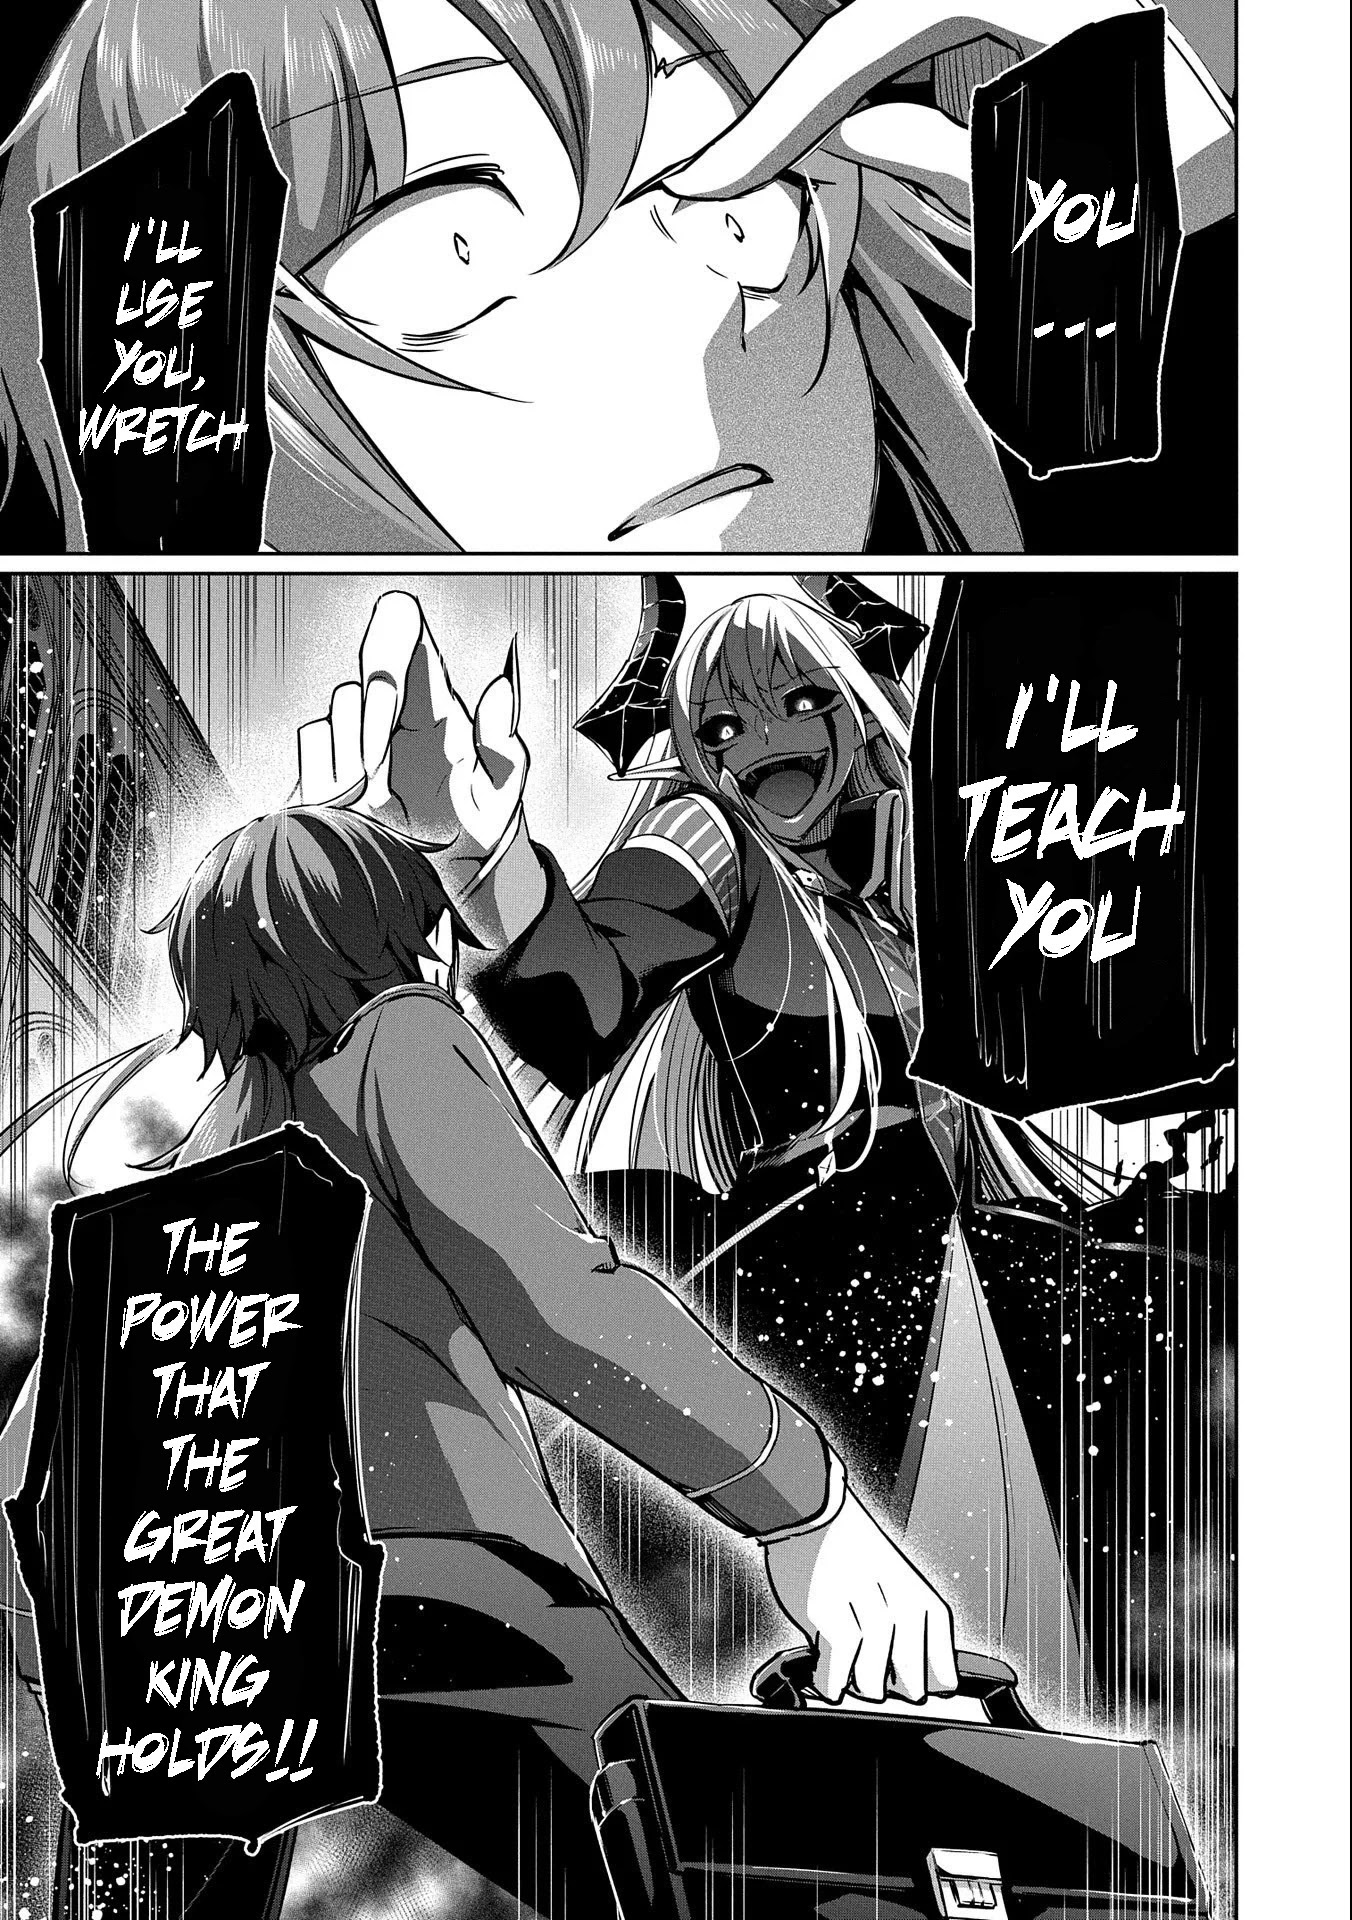 Can you recommend any teacher disciple manga that is fun to read